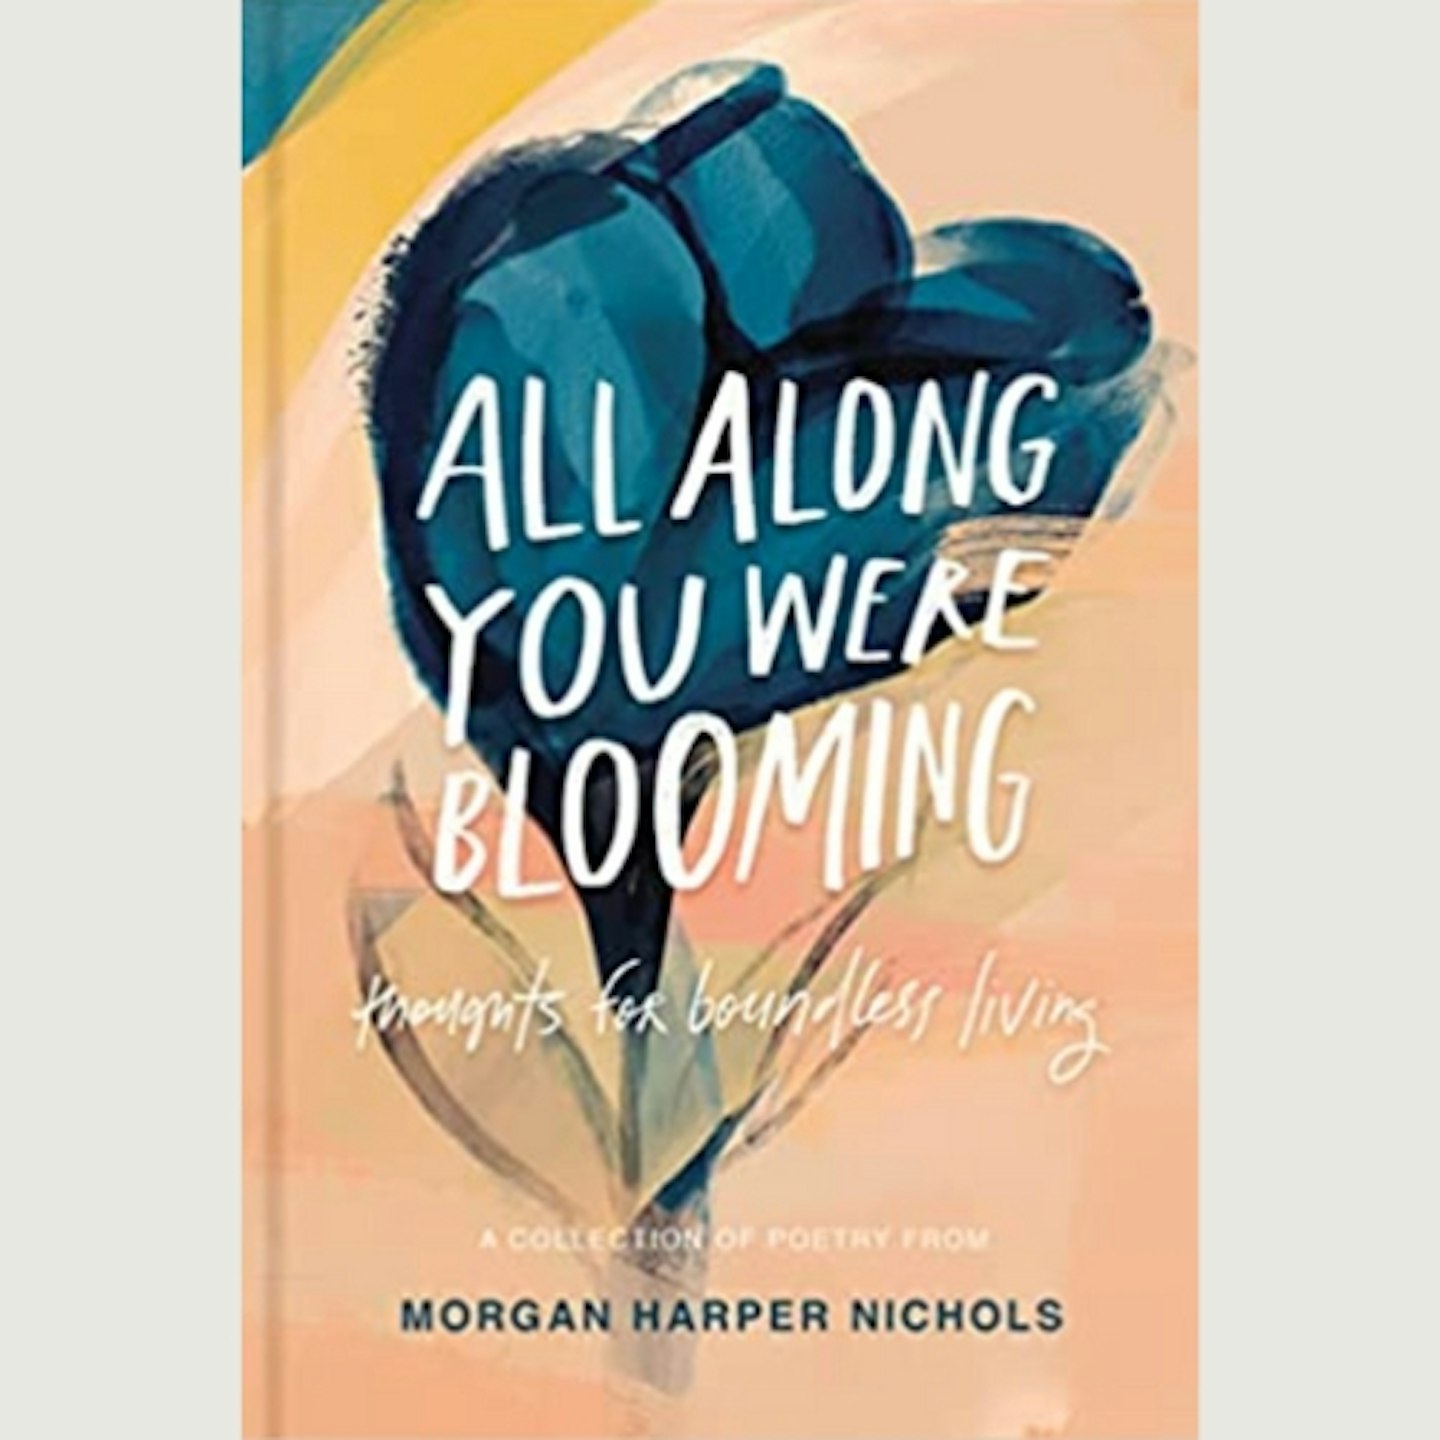 All Along You Were Blooming: Thoughts for Boundless Living